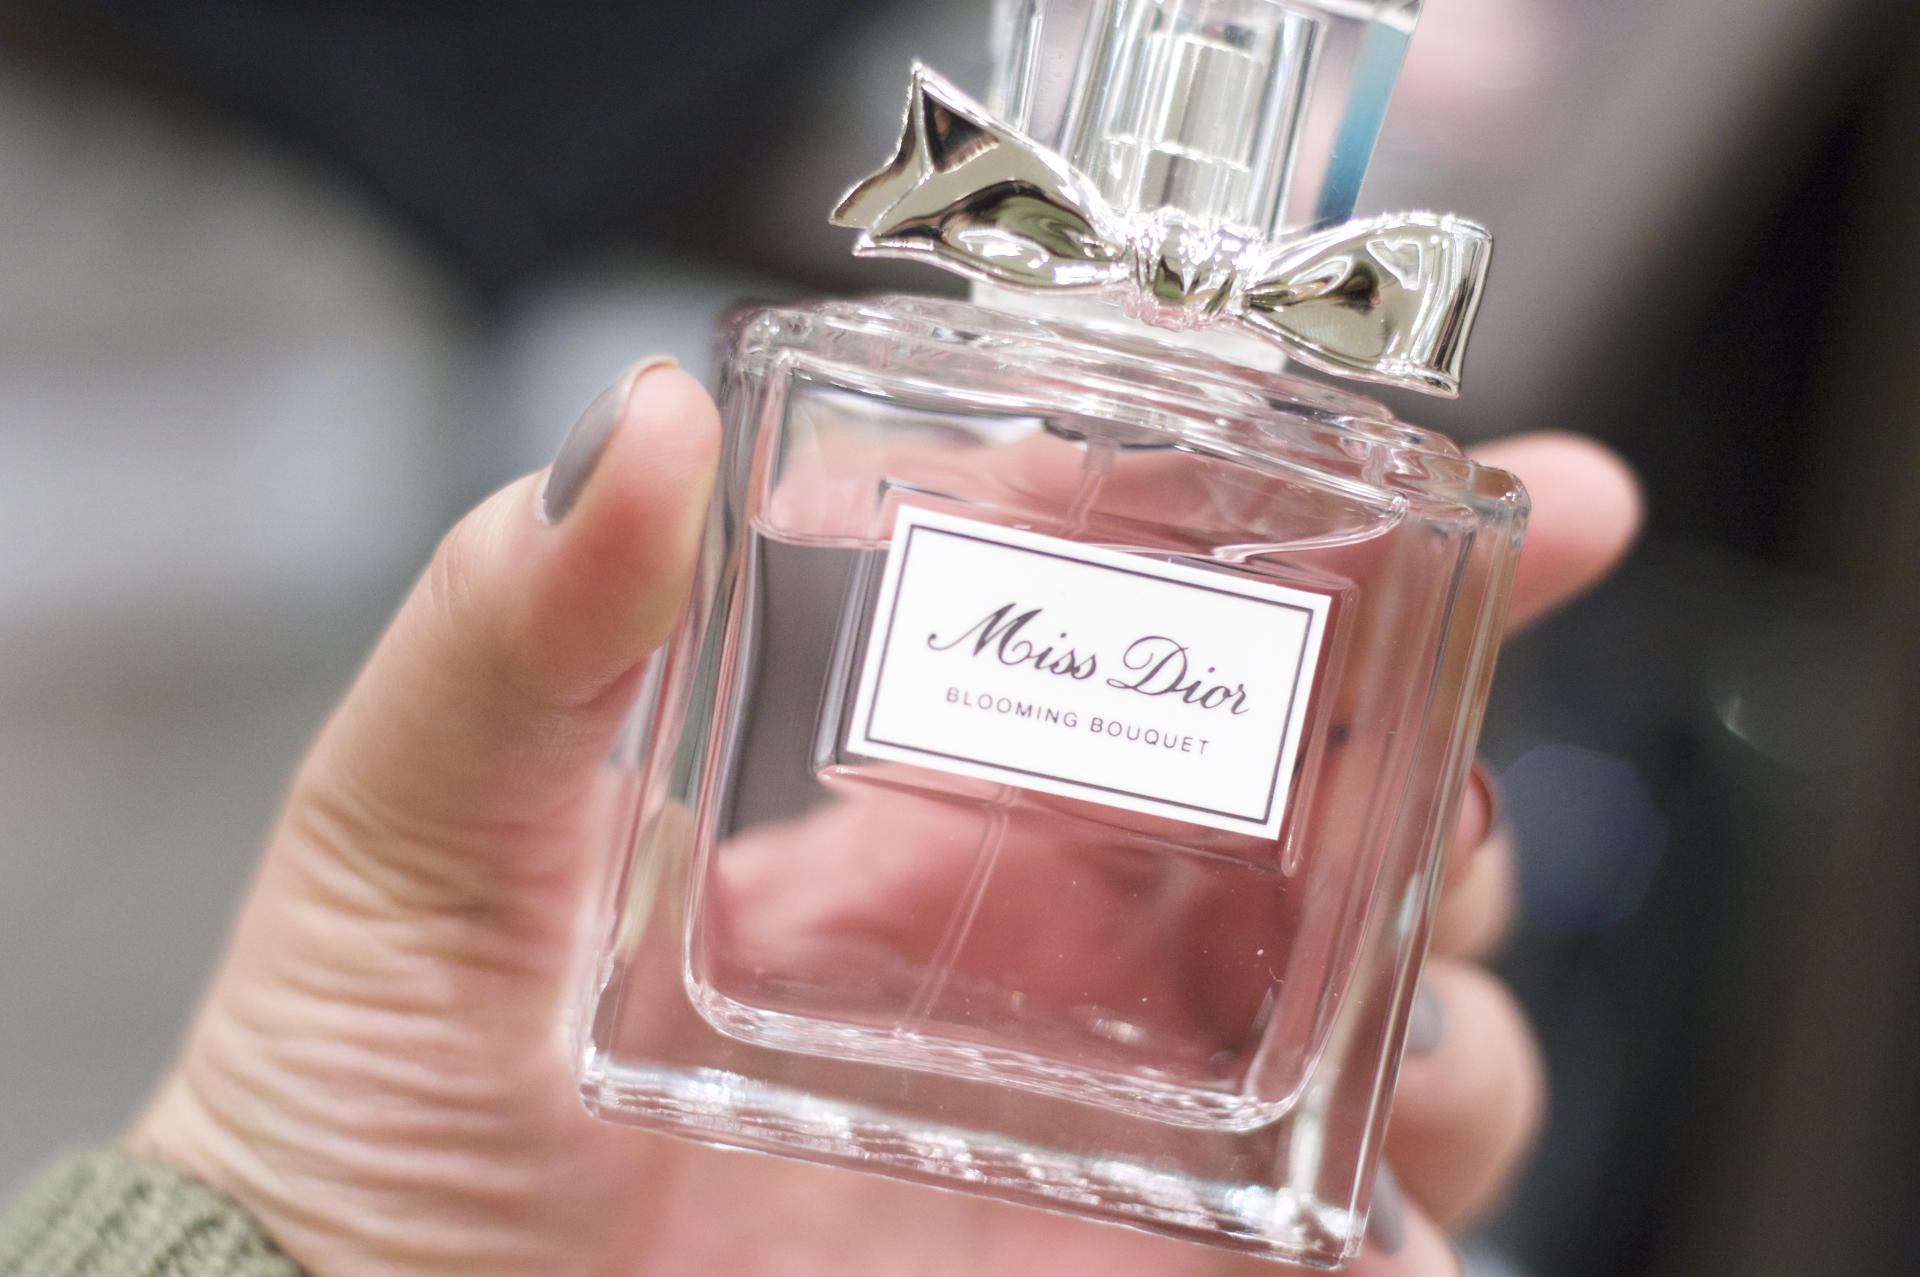 Made From Beauty Dior Blooming Bouquet